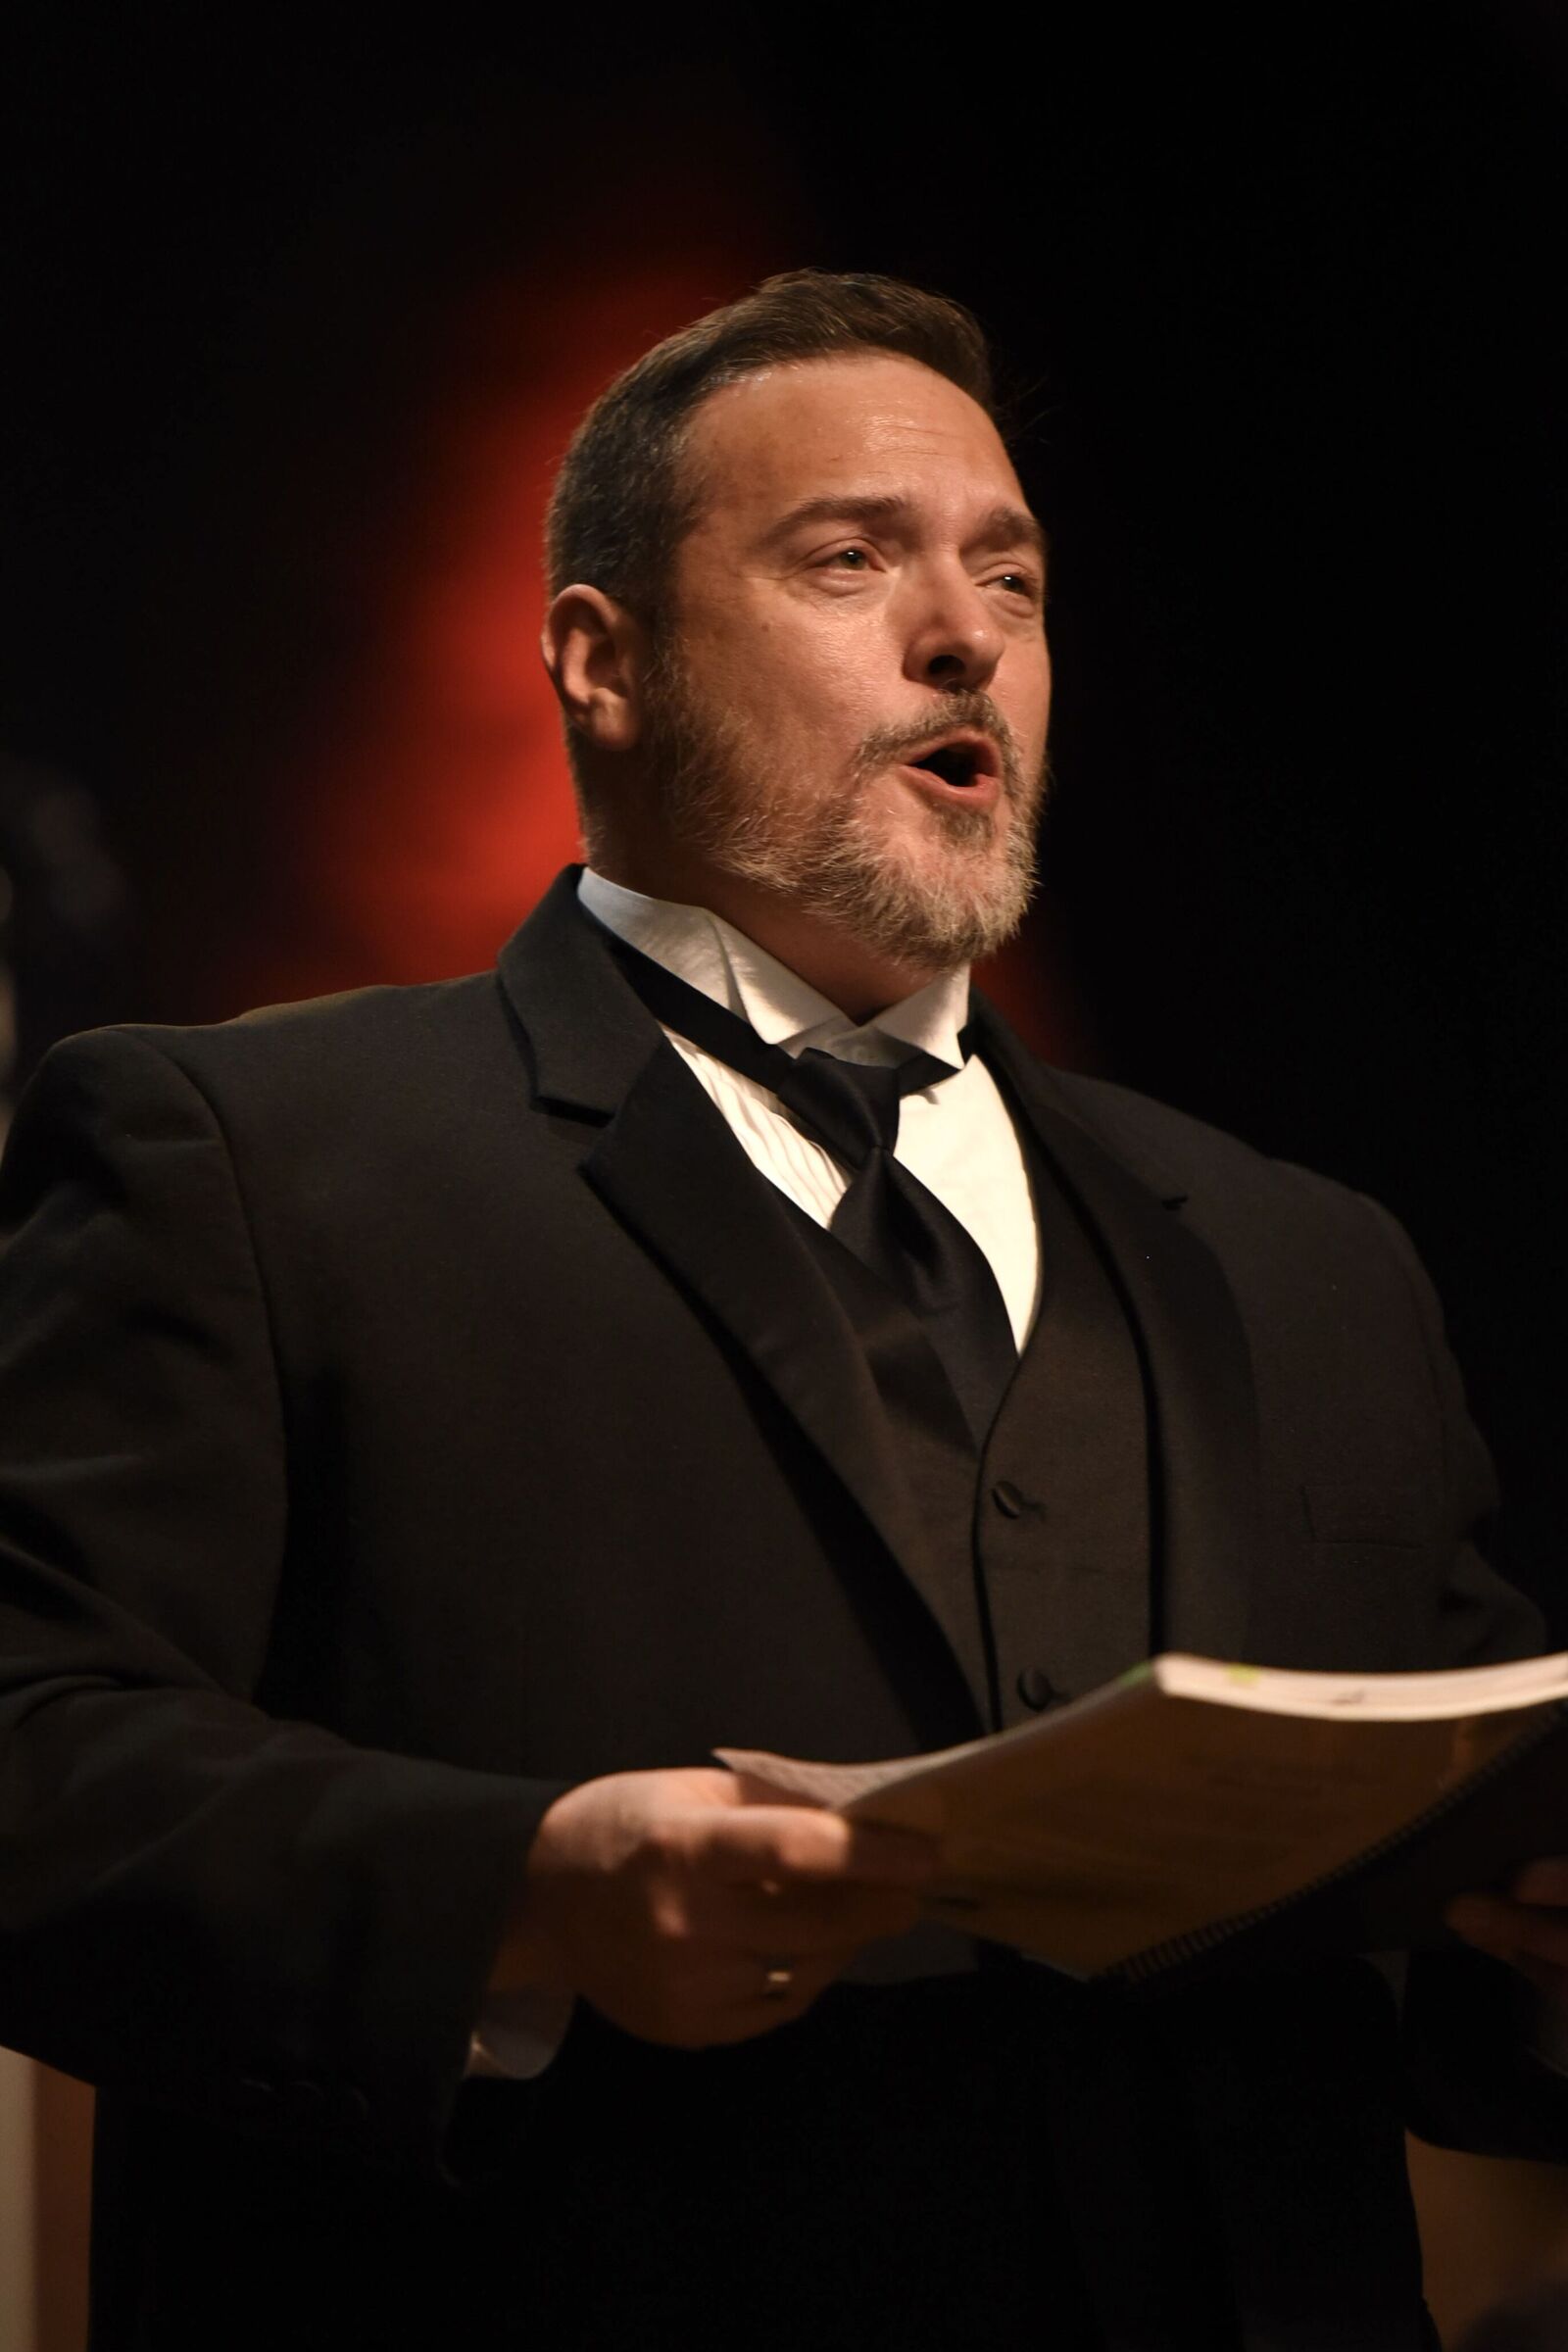 Greenville Choral Union and Orchestra to present Handel's 'Messiah' 